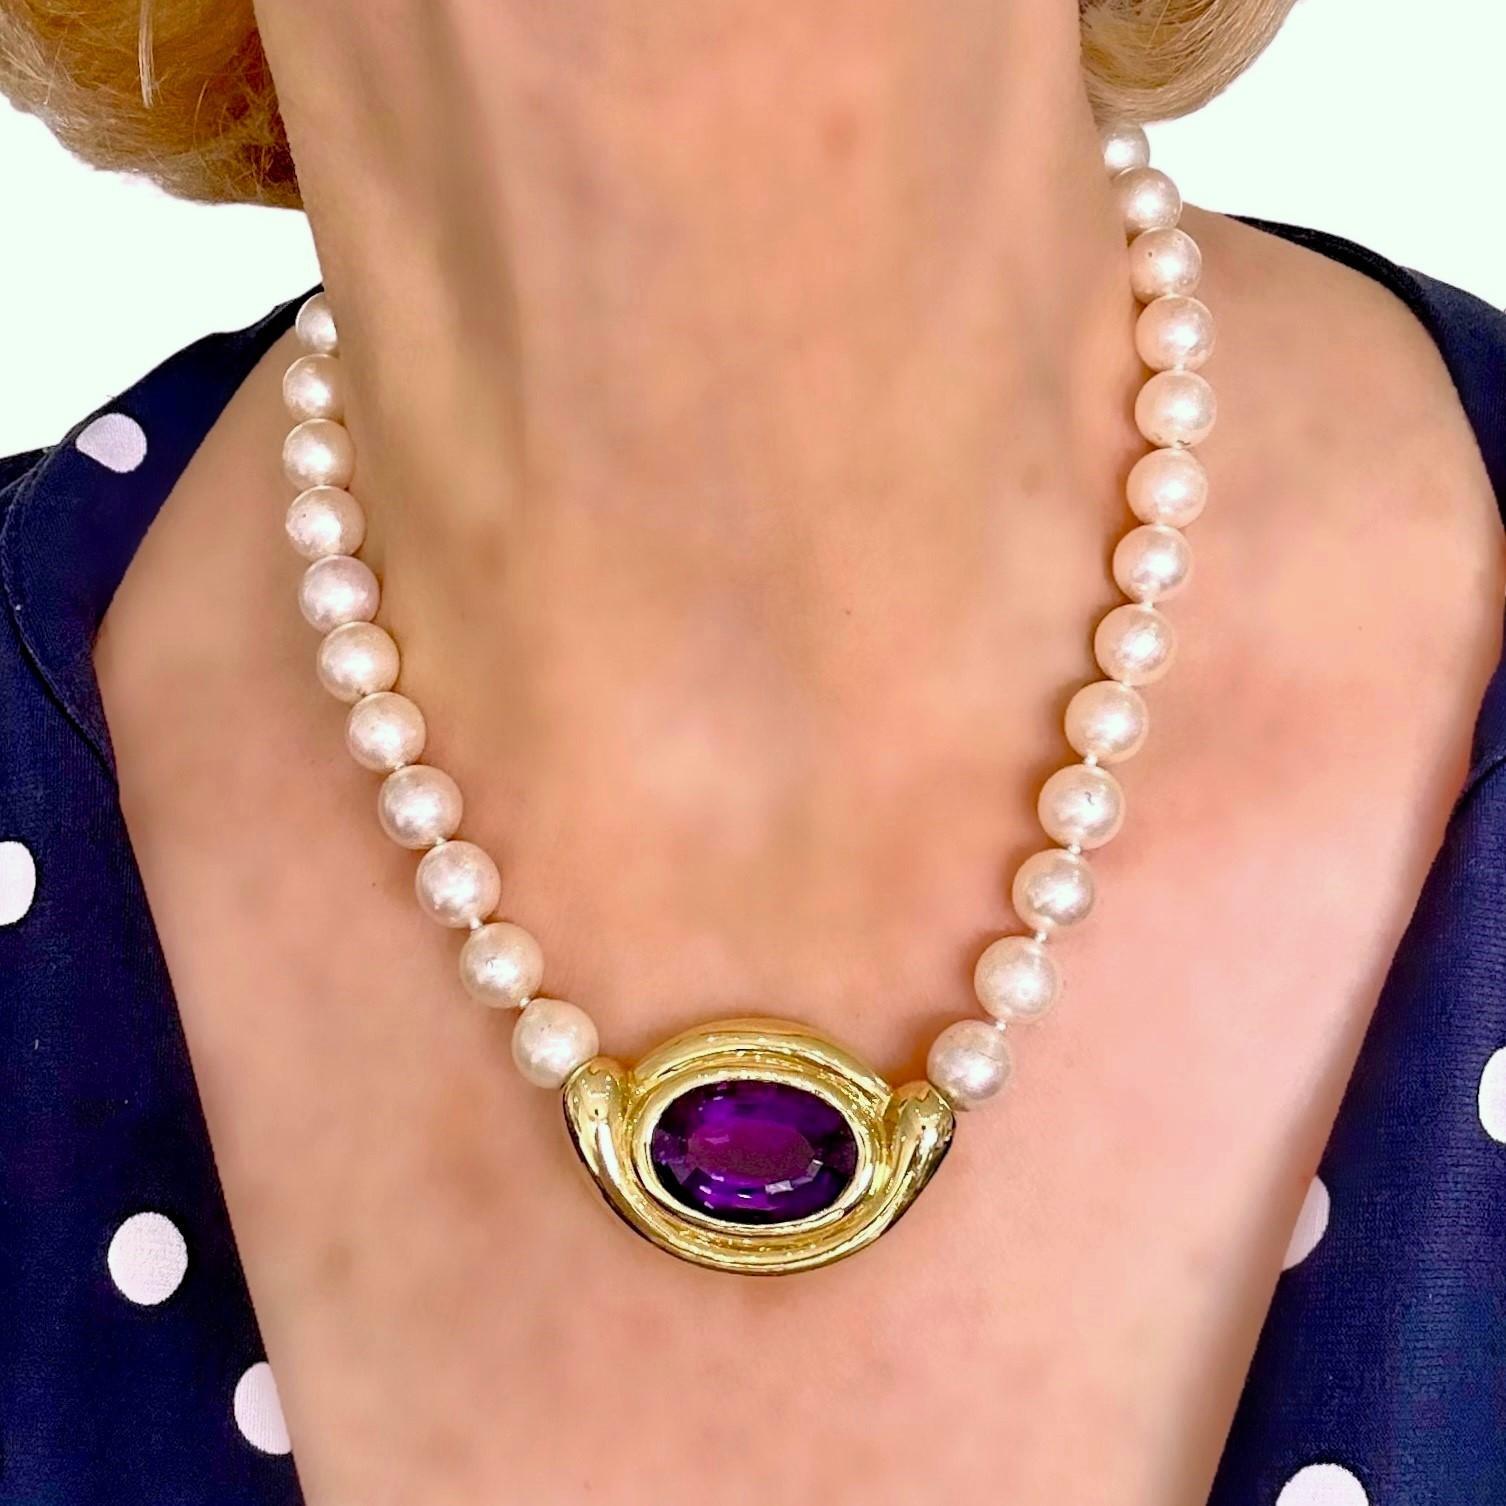 Timeless Vintage 18k Gold Modernist Necklace with Amethyst and Akoya Pearls For Sale 1